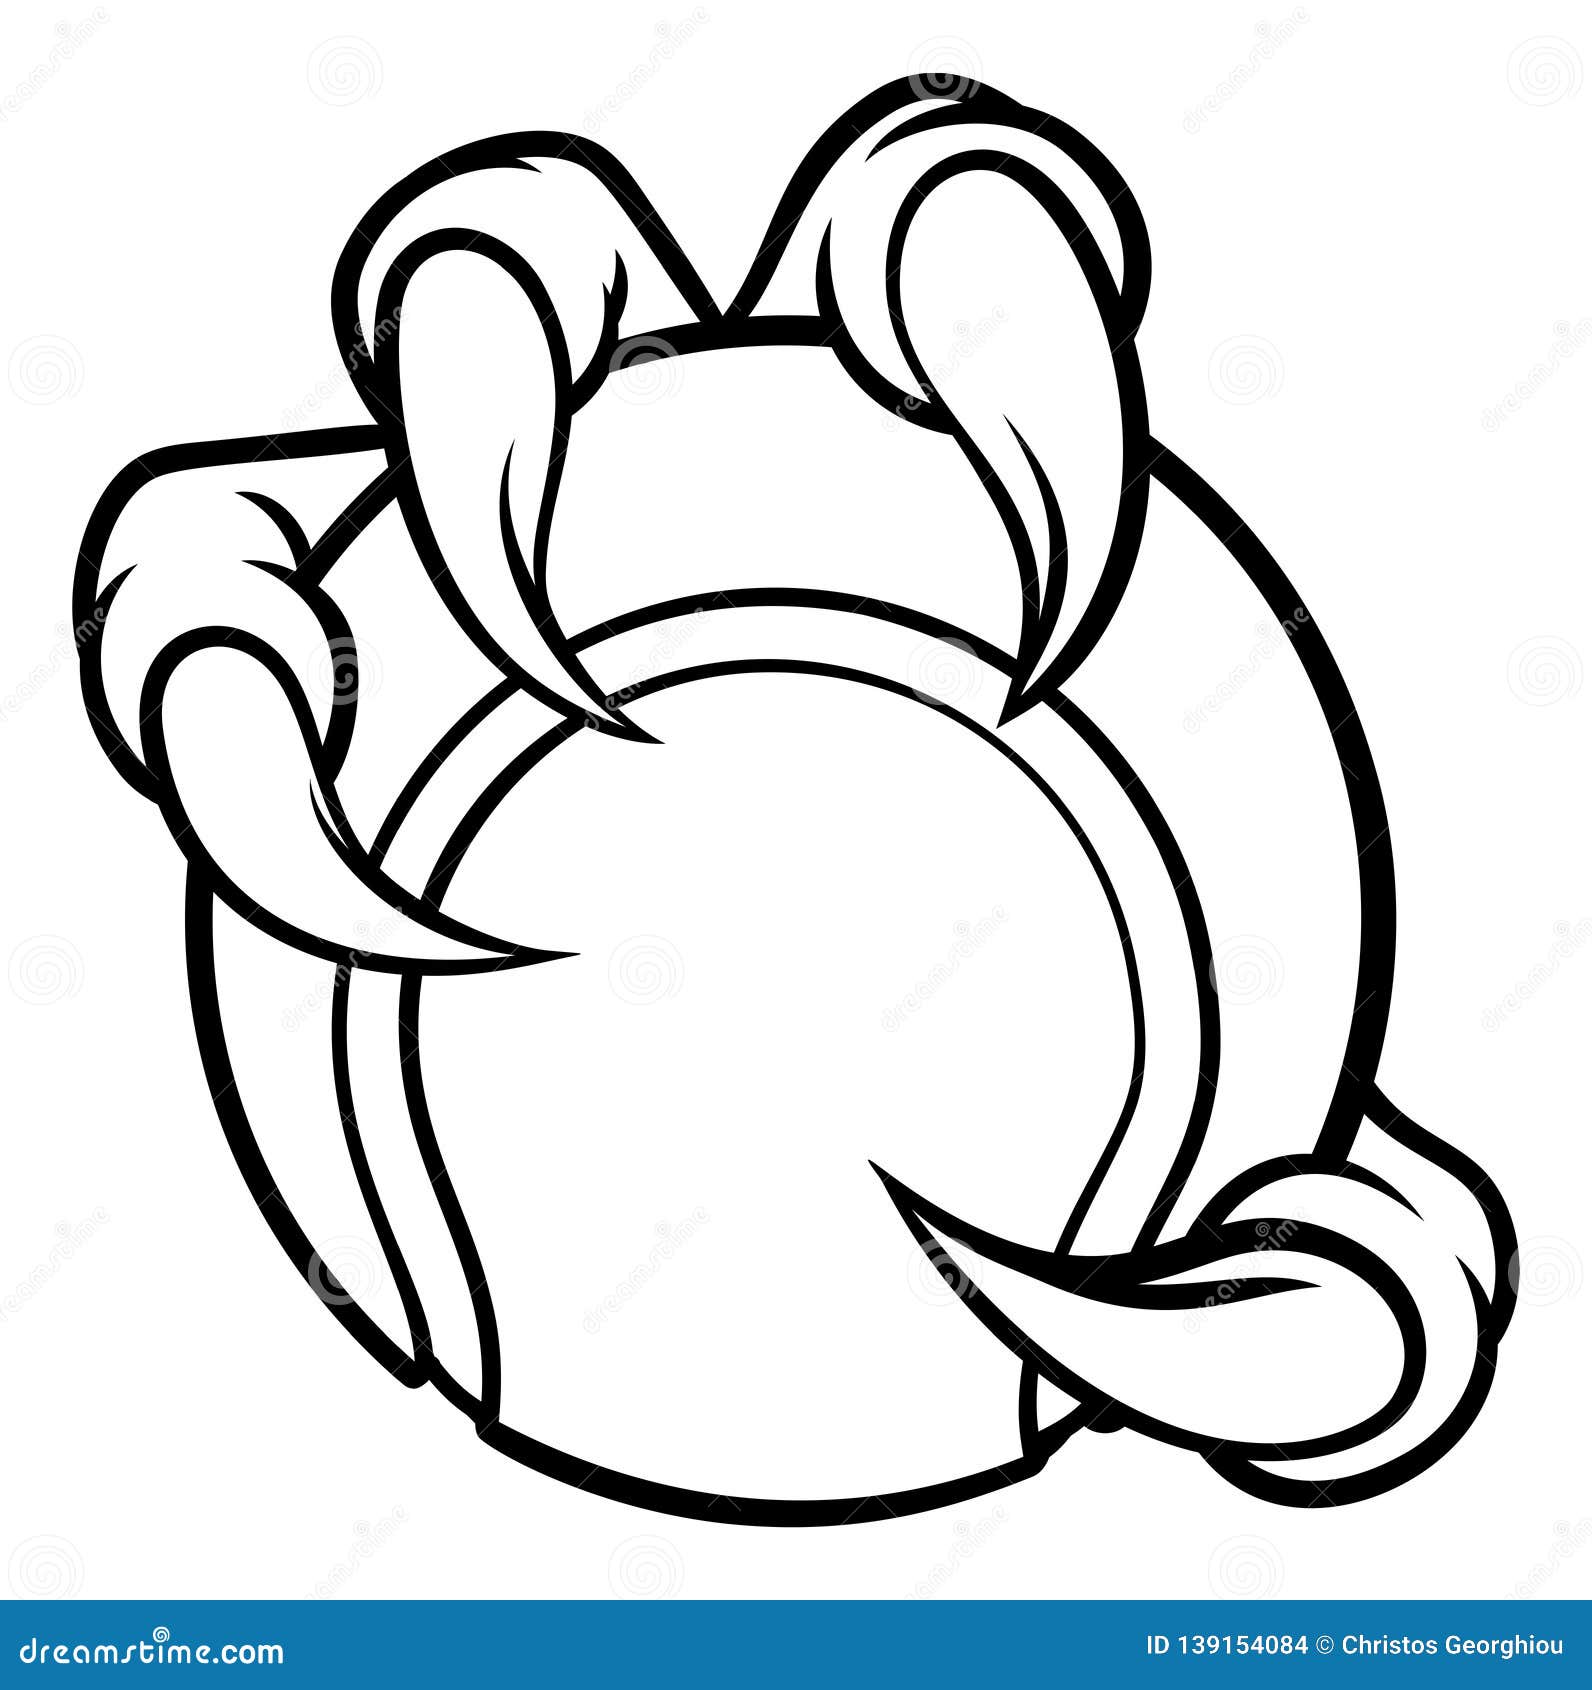 Clipart of Black and White Monster or Eagle Claws Holding a